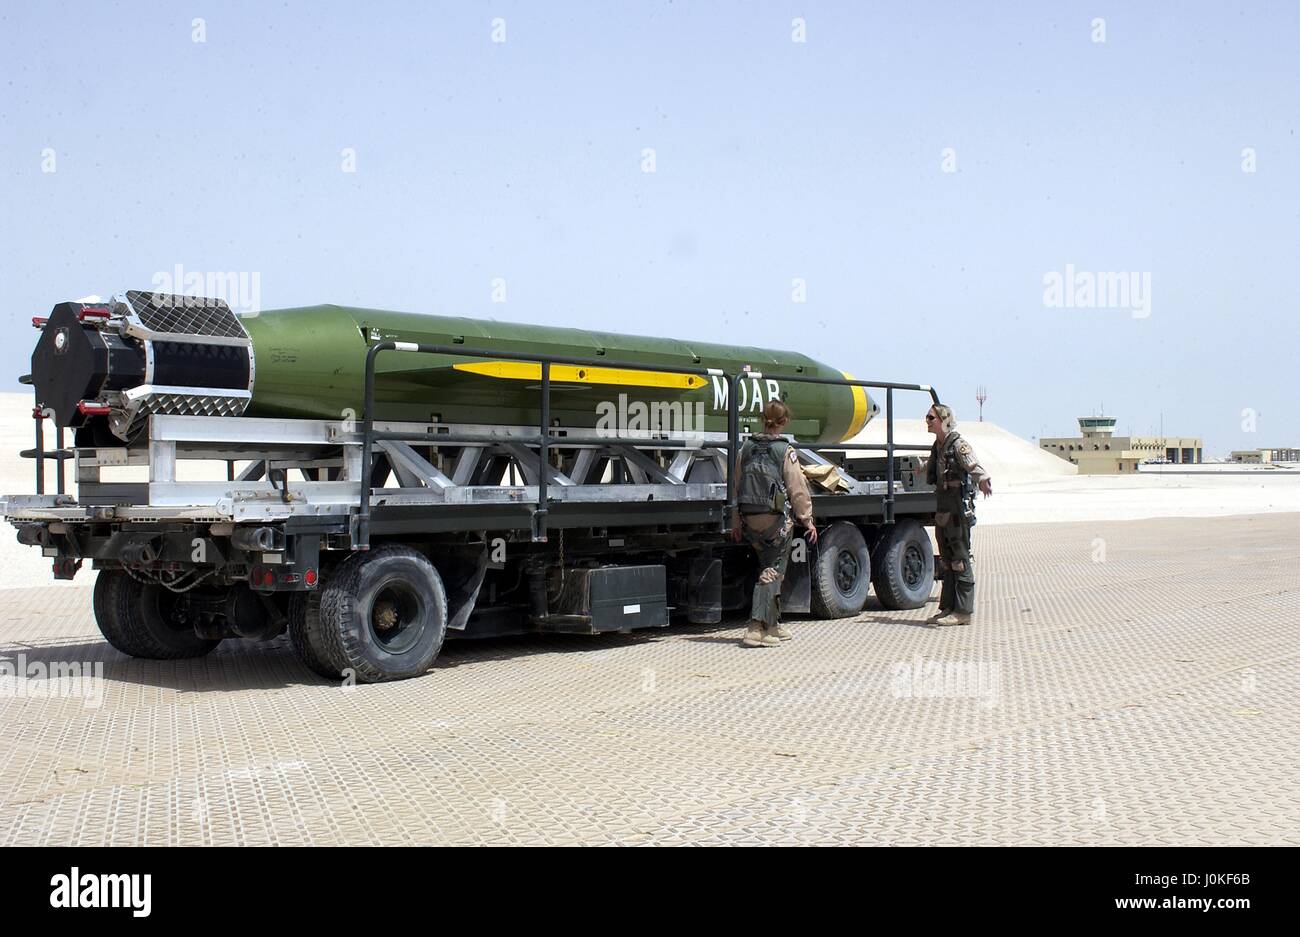 A U.S. Air Force Massive Ordnance Air Blast (MOAB) bomb sits on the flight line on a flatbed trailer for possible use during Operation Iraqi Freedom May 3, 2003 in Al Udeid Air Base, Qatar.  The MOAB is a precision-guided munition weighing 21,500 pounds and is the largest non-nuclear conventional weapon in existence. Stock Photo